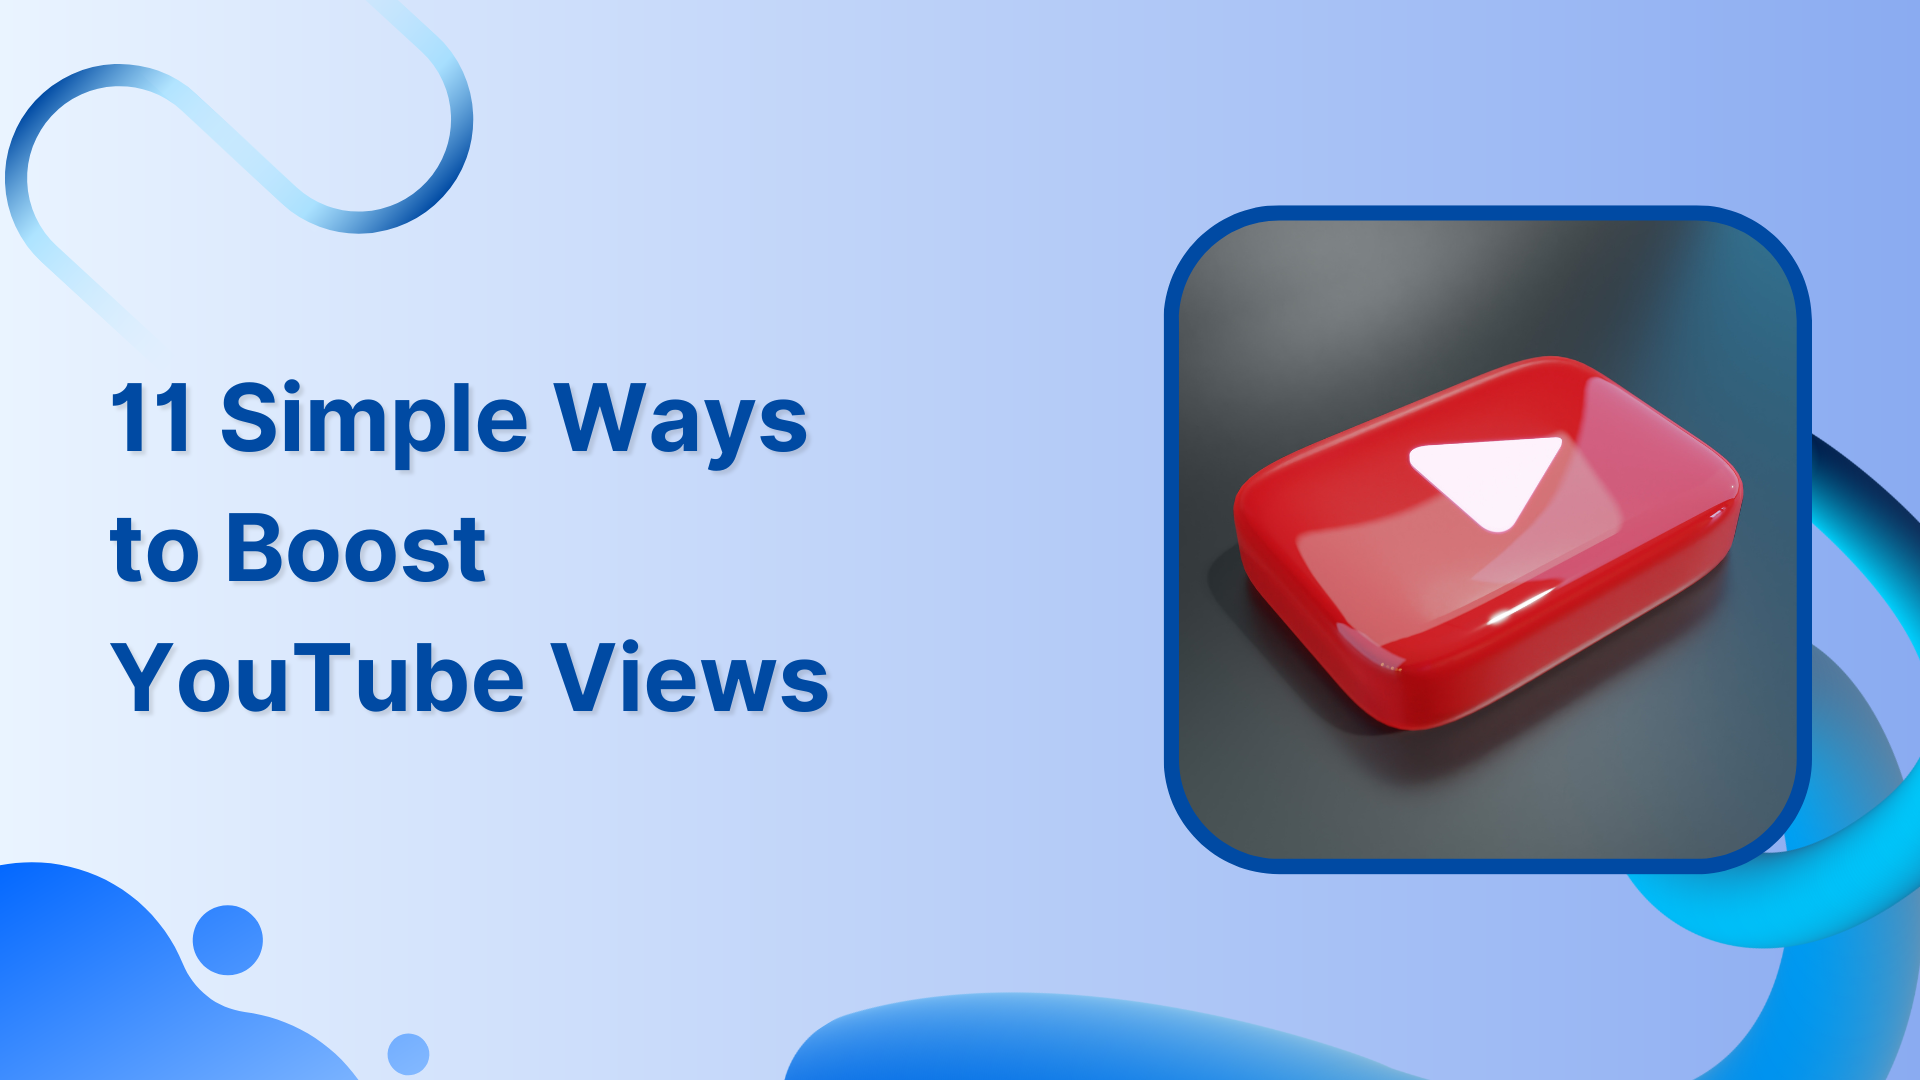 How To Boost Your YouTube Views in 11 Simple Ways